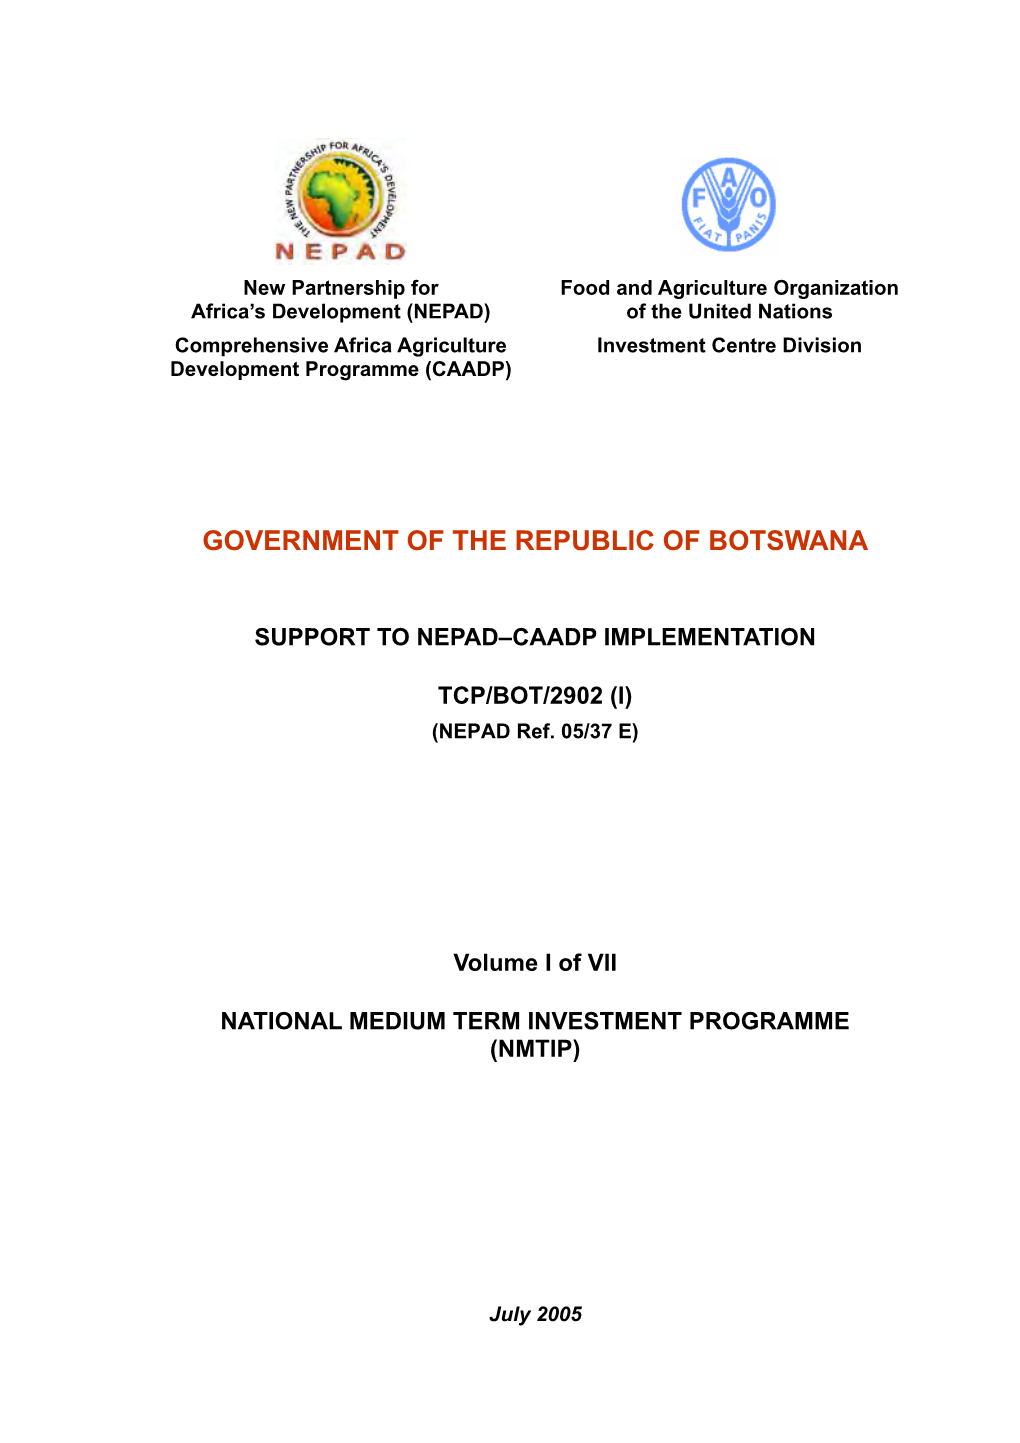 Government of the Republic of Botswana